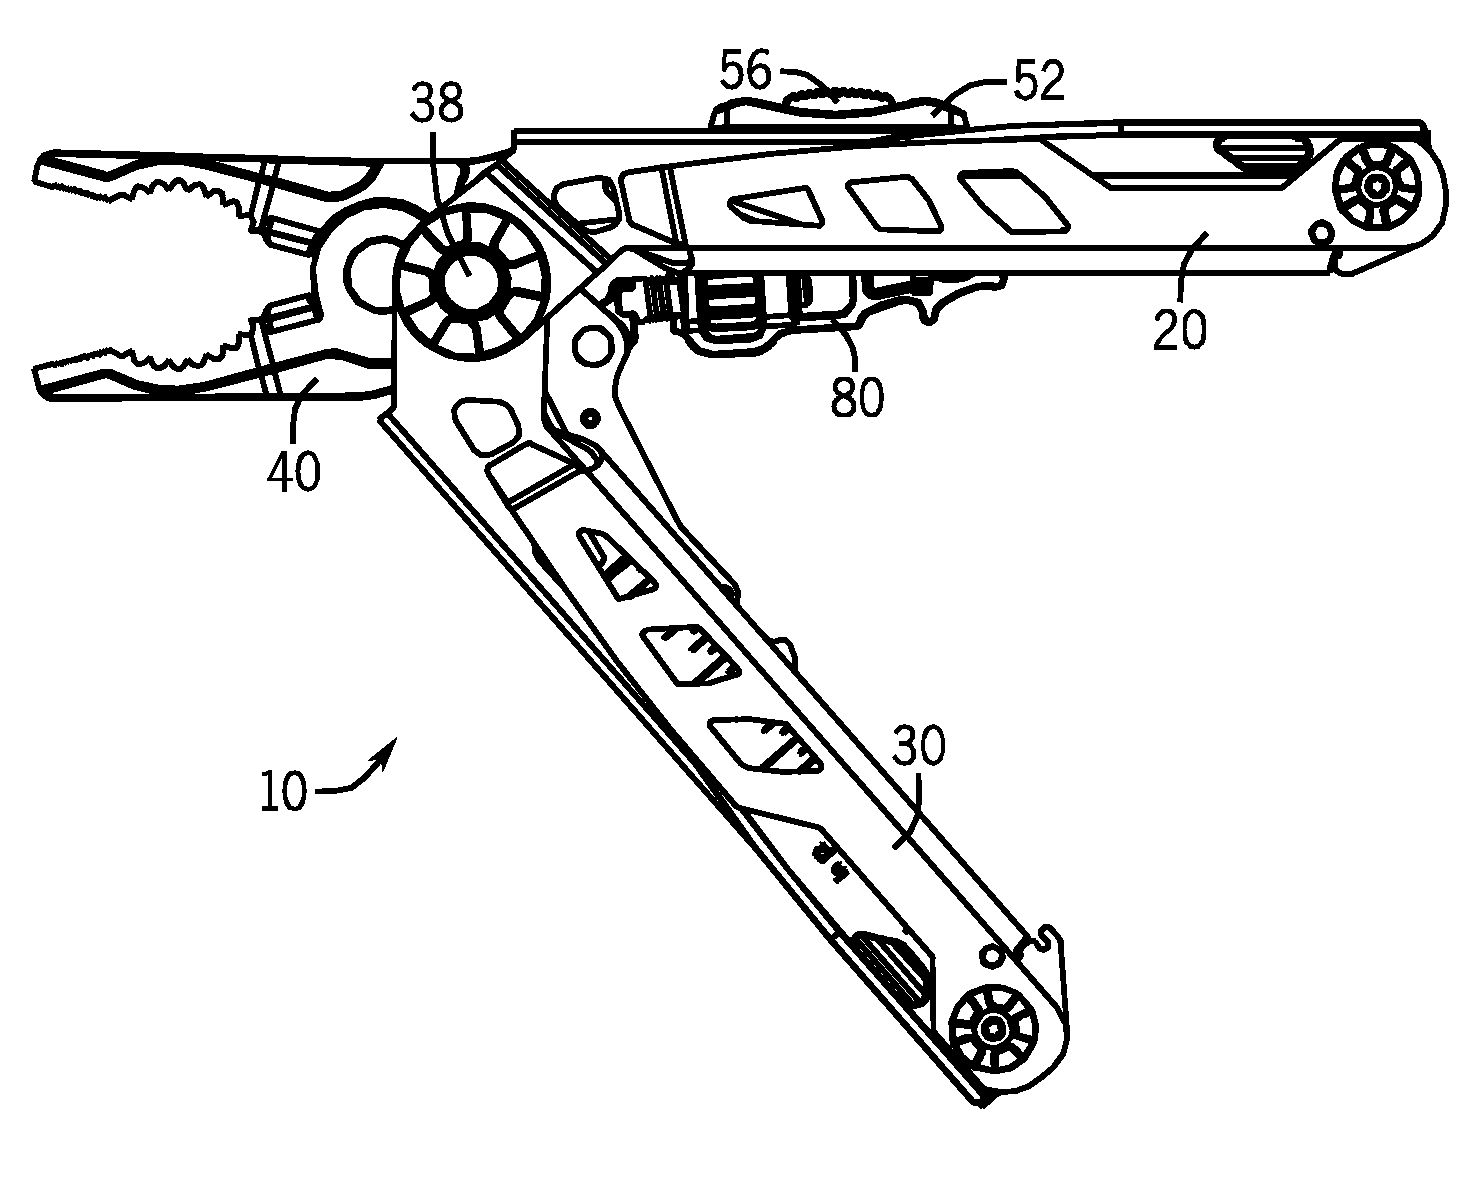 Multi-function tool with locking pliers